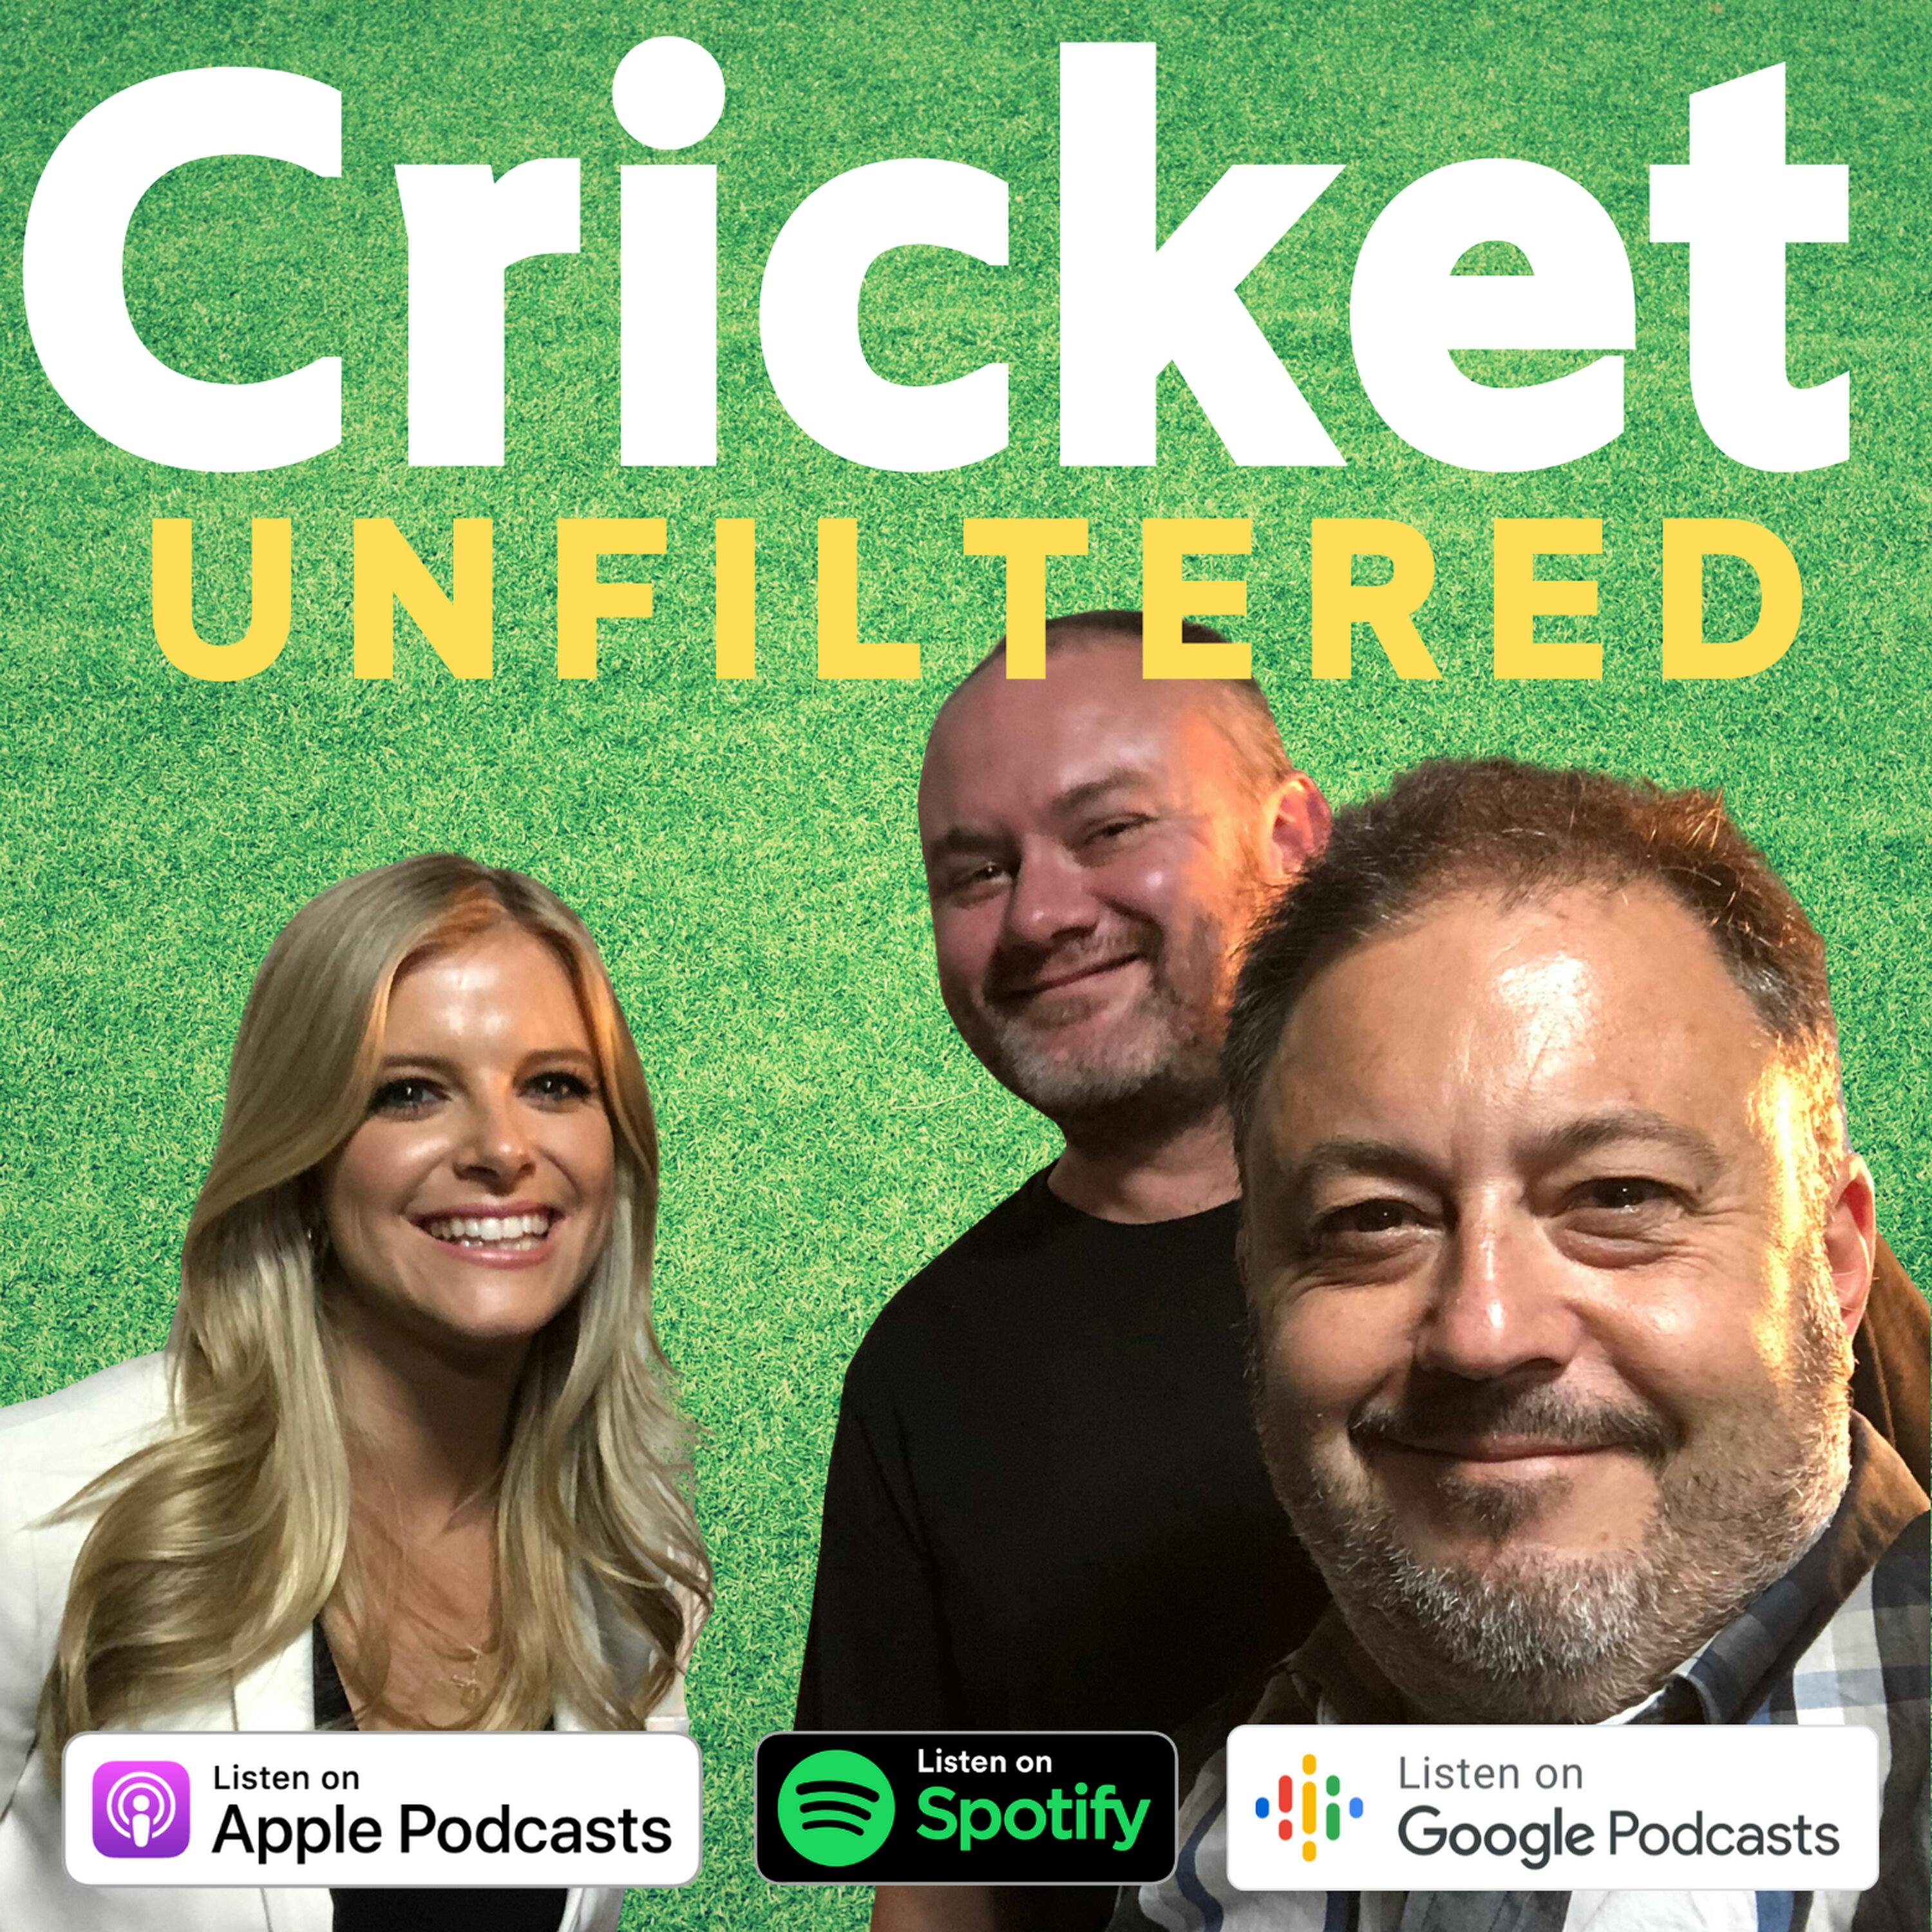 The Aussies Are The Best At Cricket Again & 'The Test' Ep 4 Review